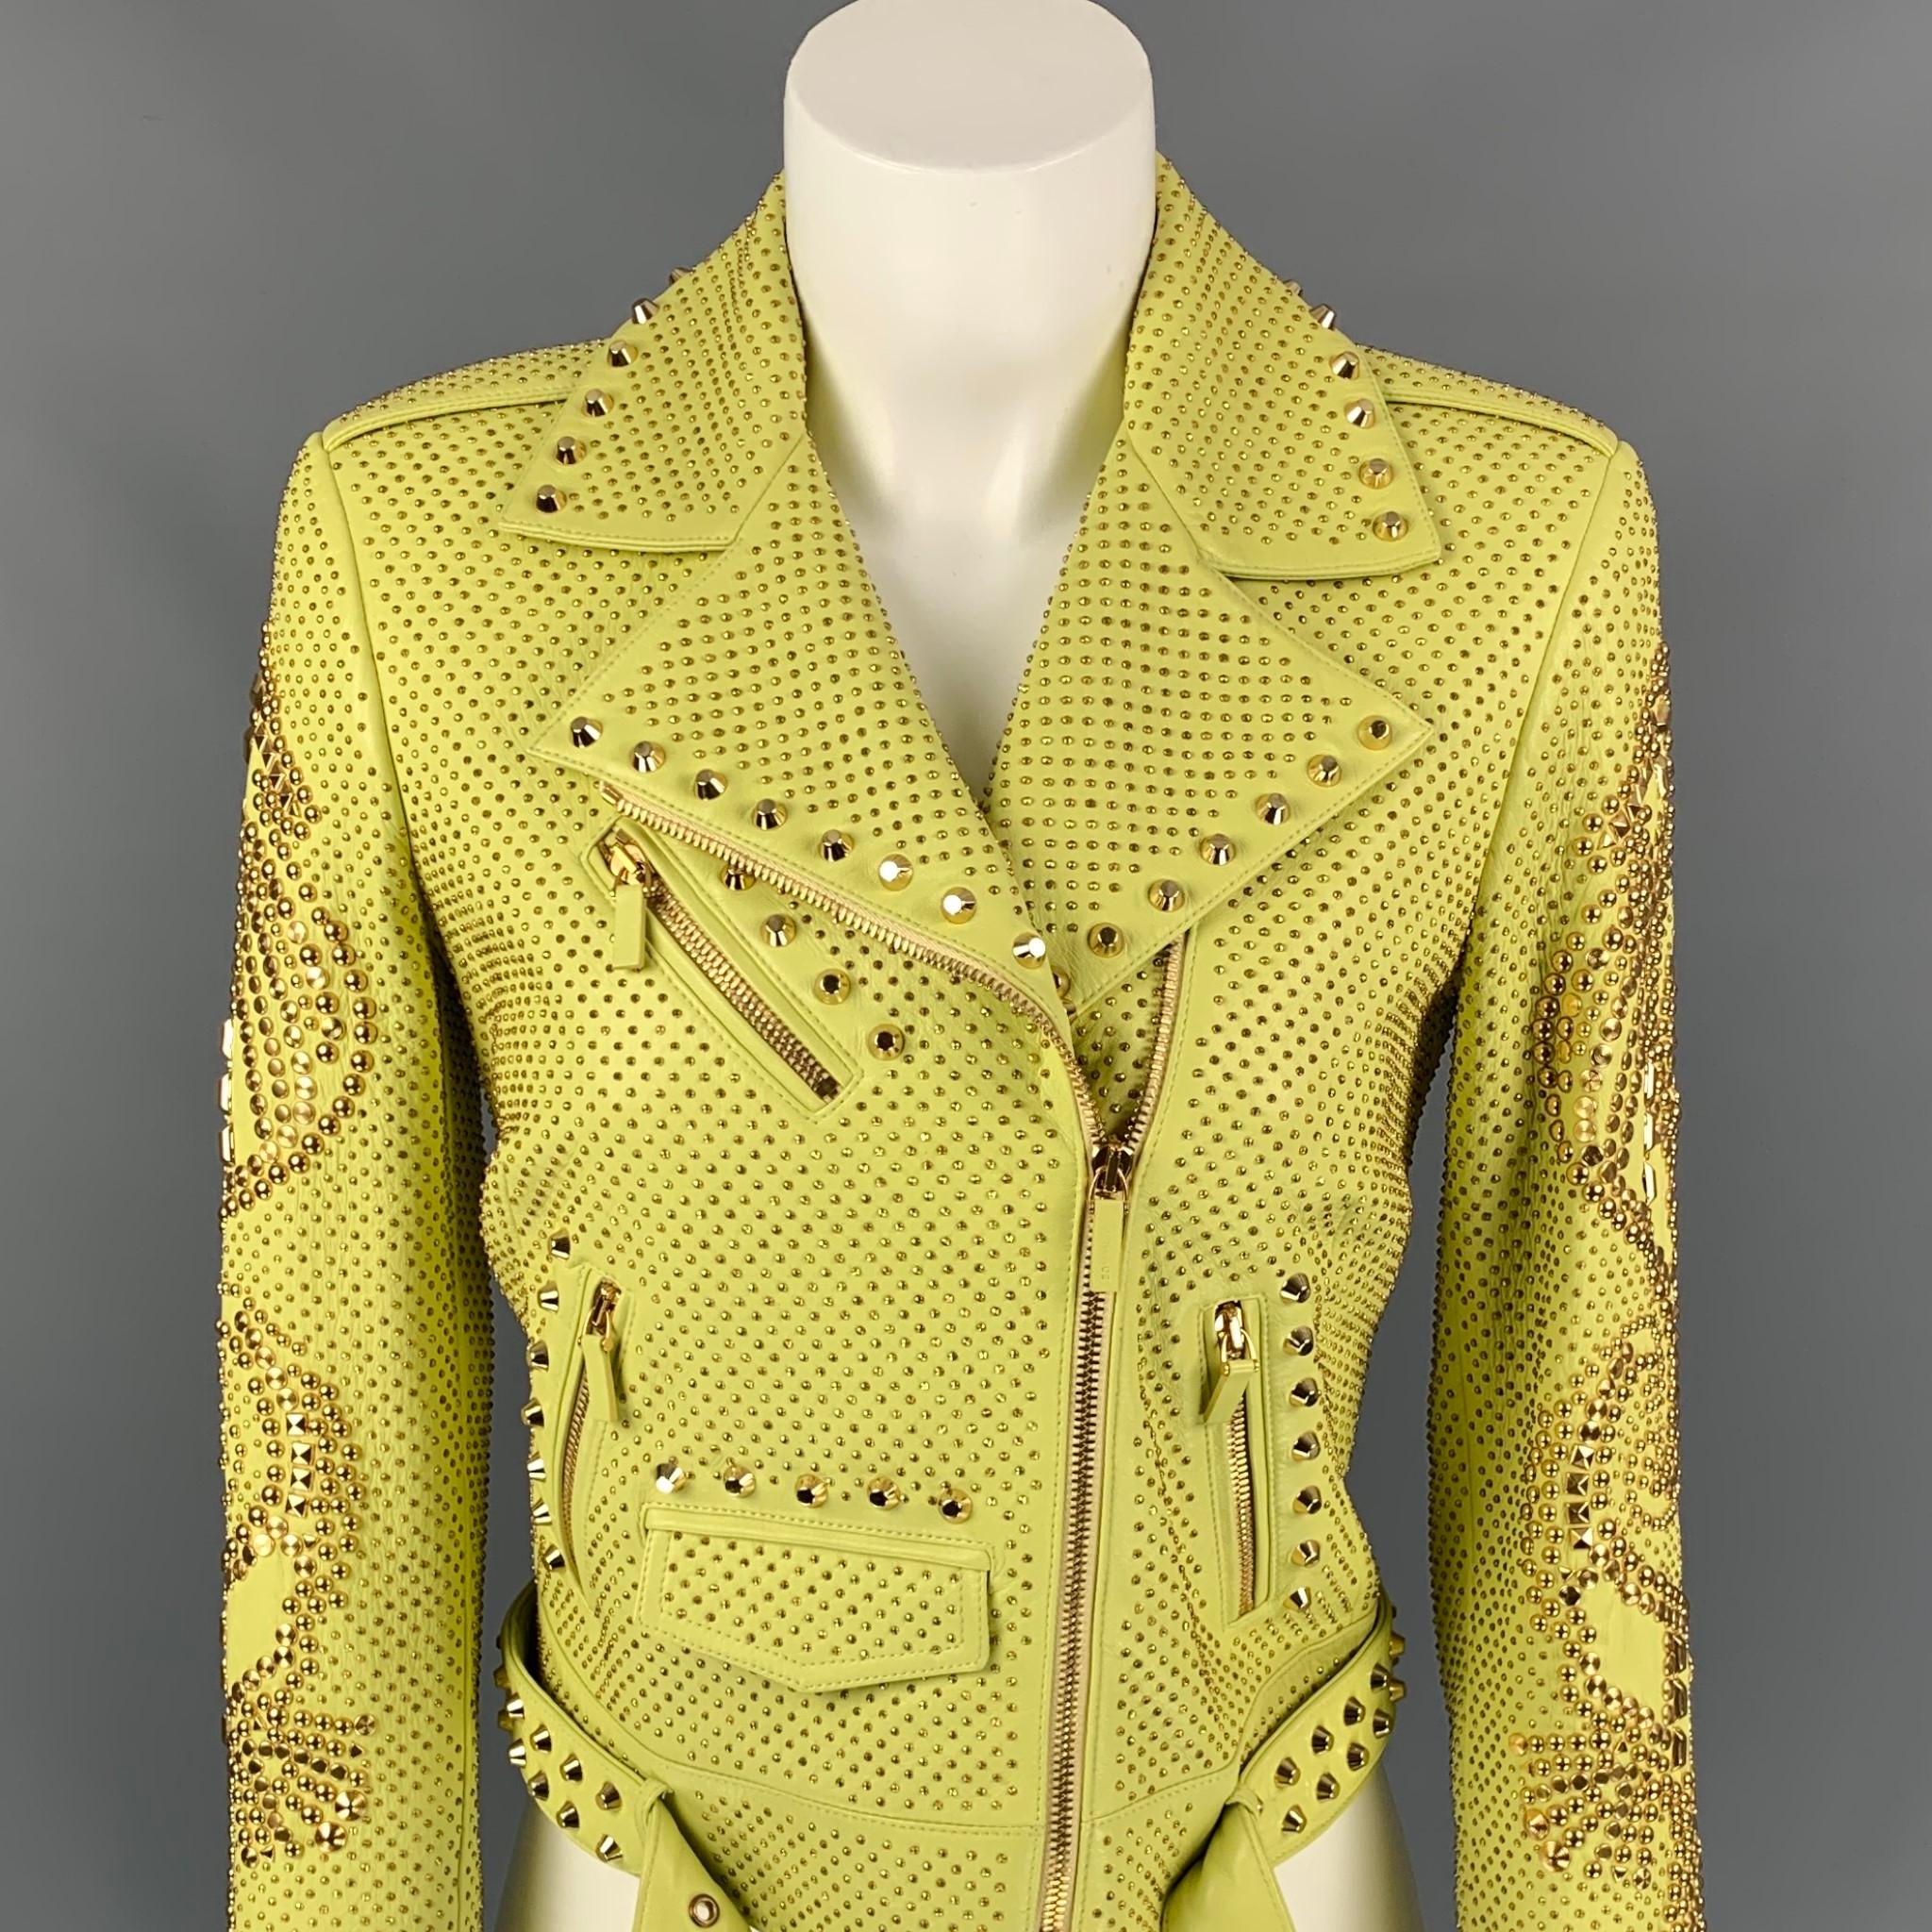 VERSACE Spring 2012 jacket comes in a luminescent yellow leather with a full monogram print liner featuring a biker style, gold tone studded details throughout, detachable epaulettes, zipper sleeves, belted, front pockets, gold tone hardware, and a